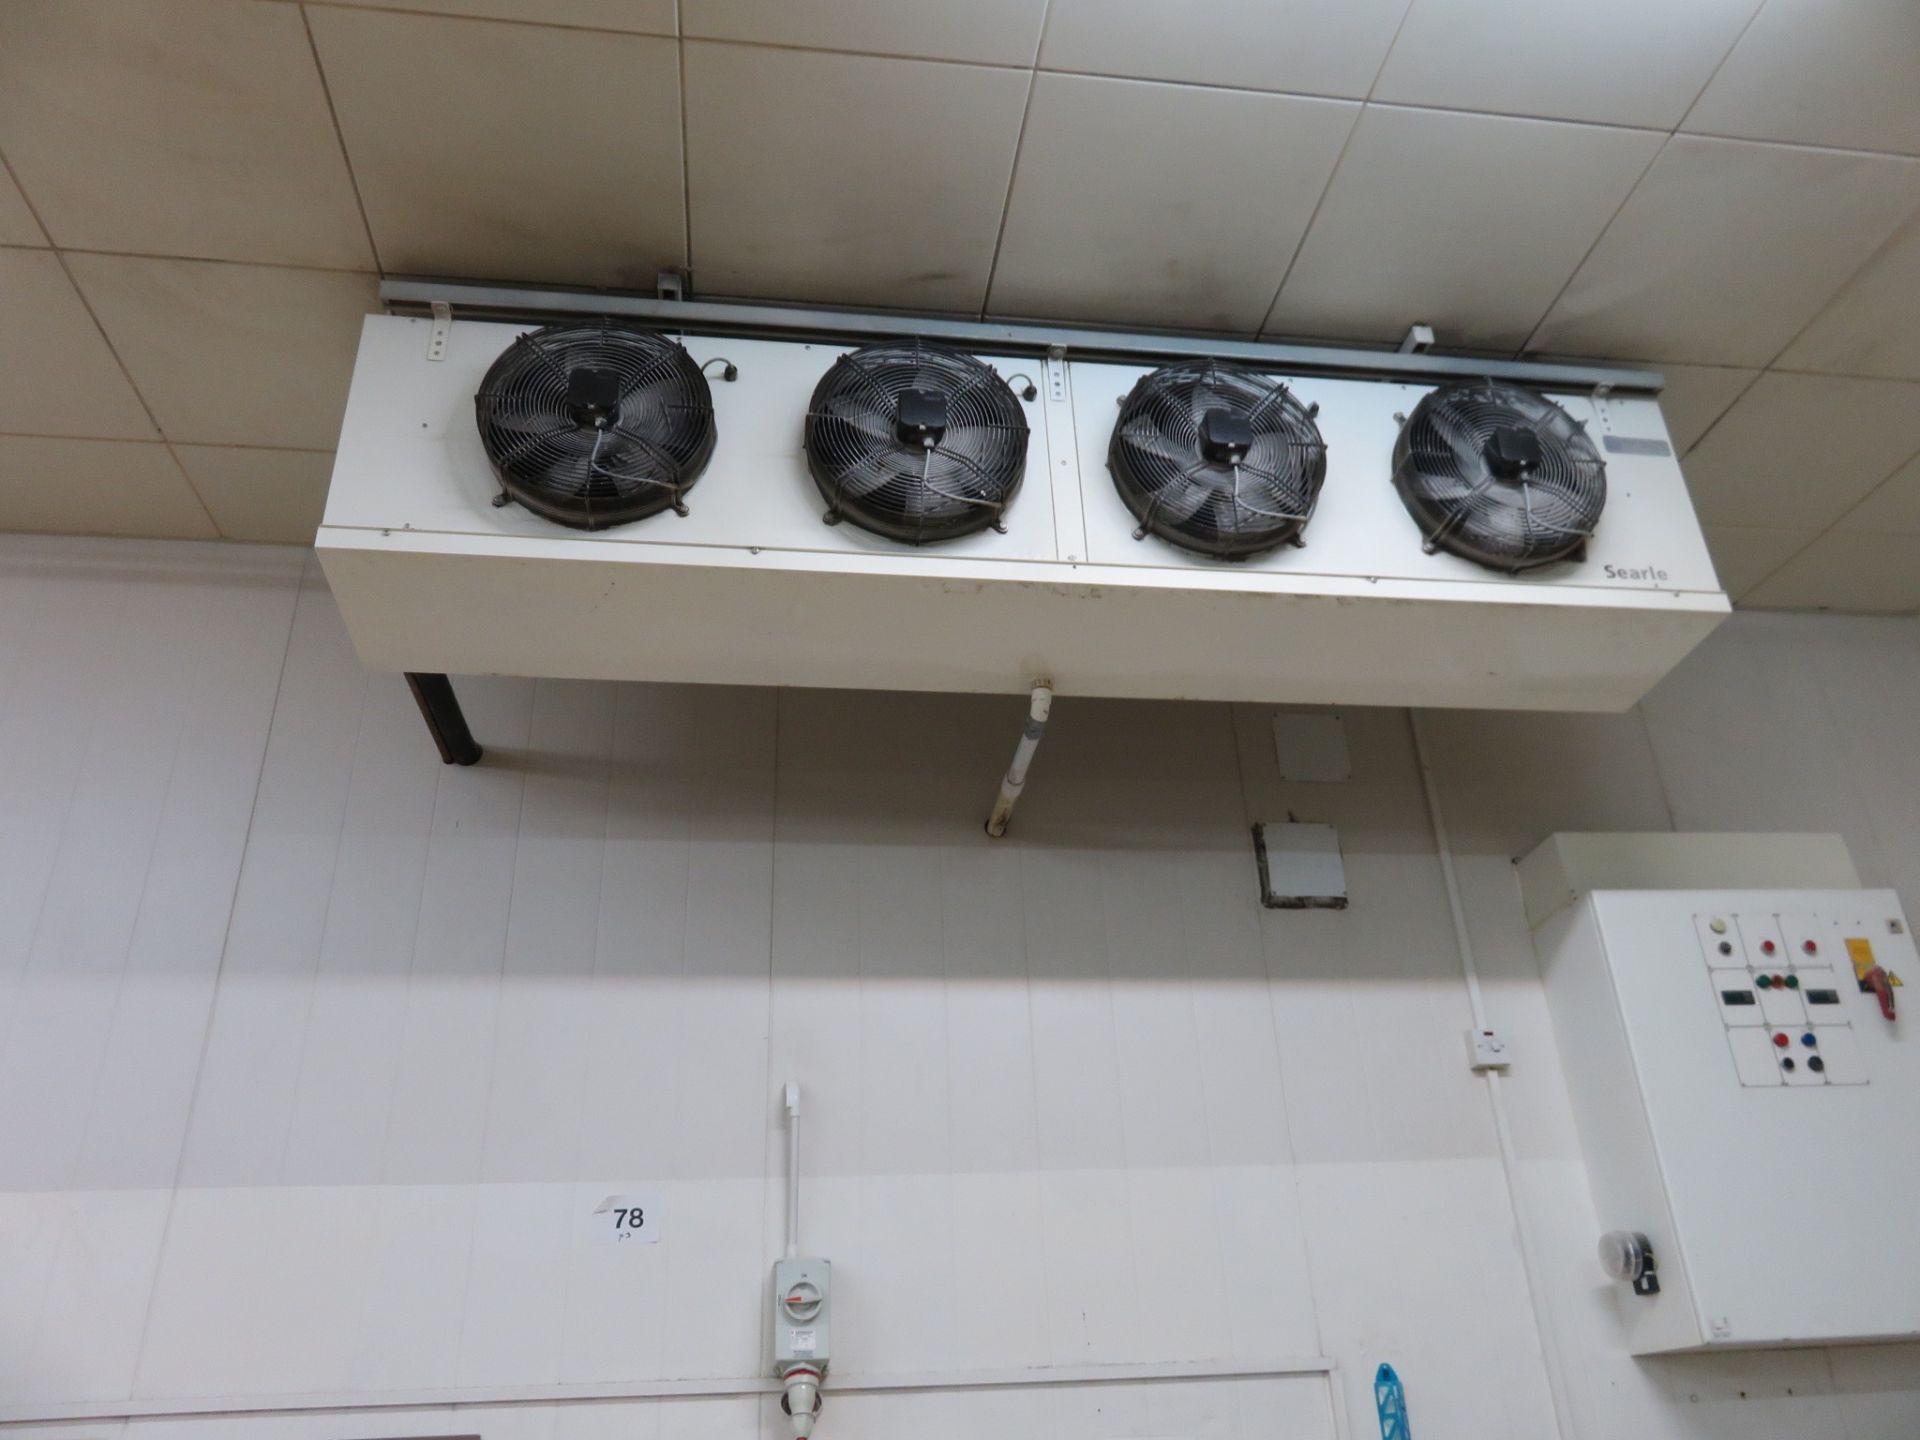 3 x Searle 4 Fan Evaporator. lift out charge £210